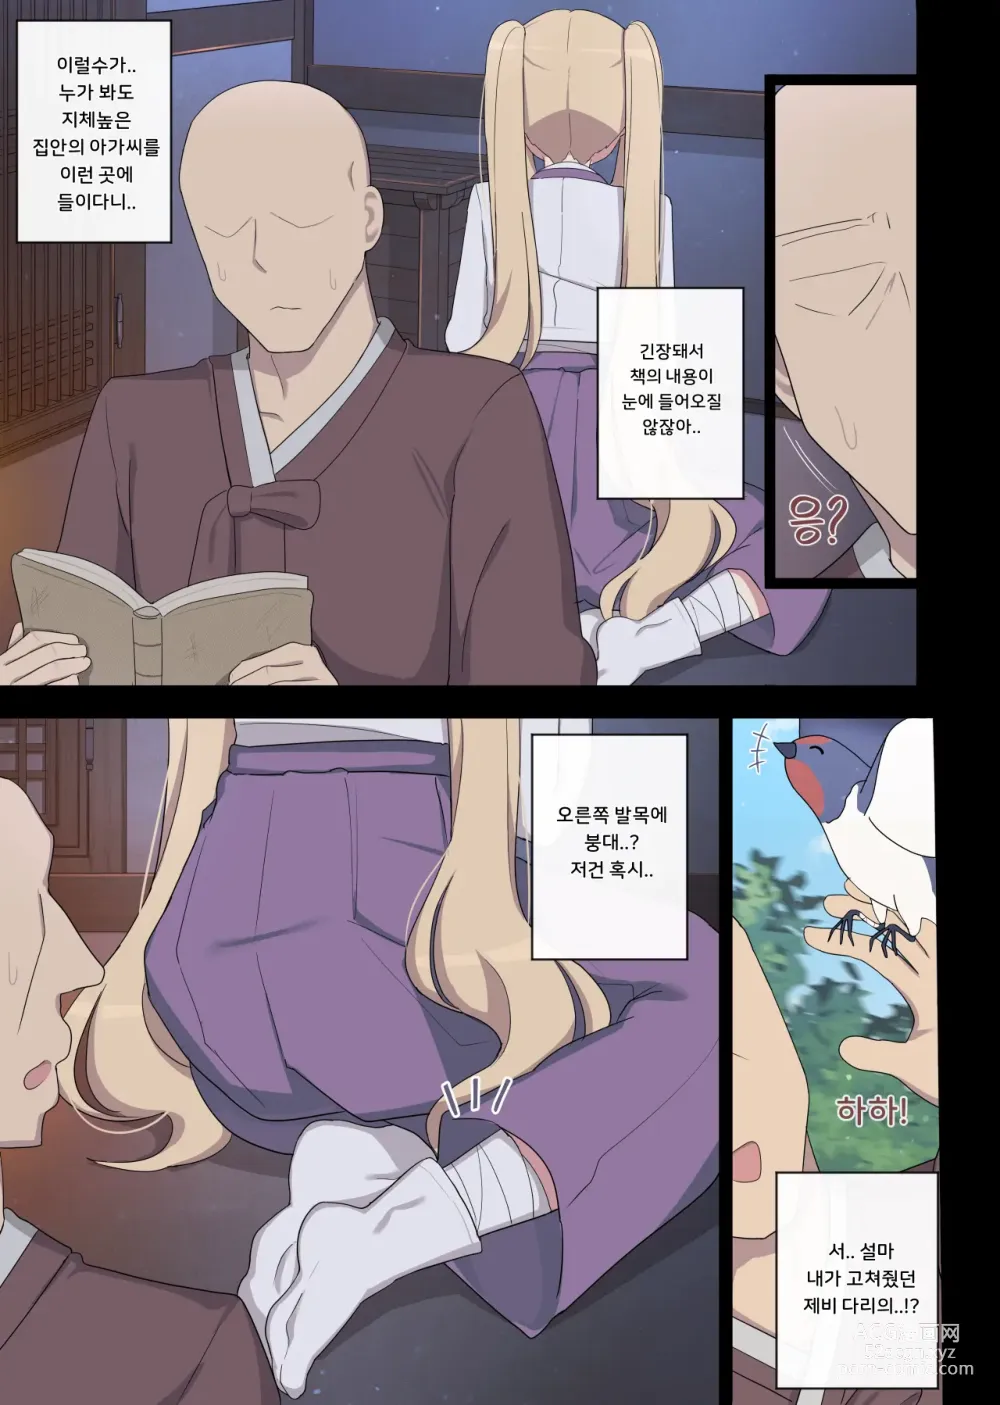 Page 6 of doujinshi The swallow that repaid a favor 1-2 (decensored)